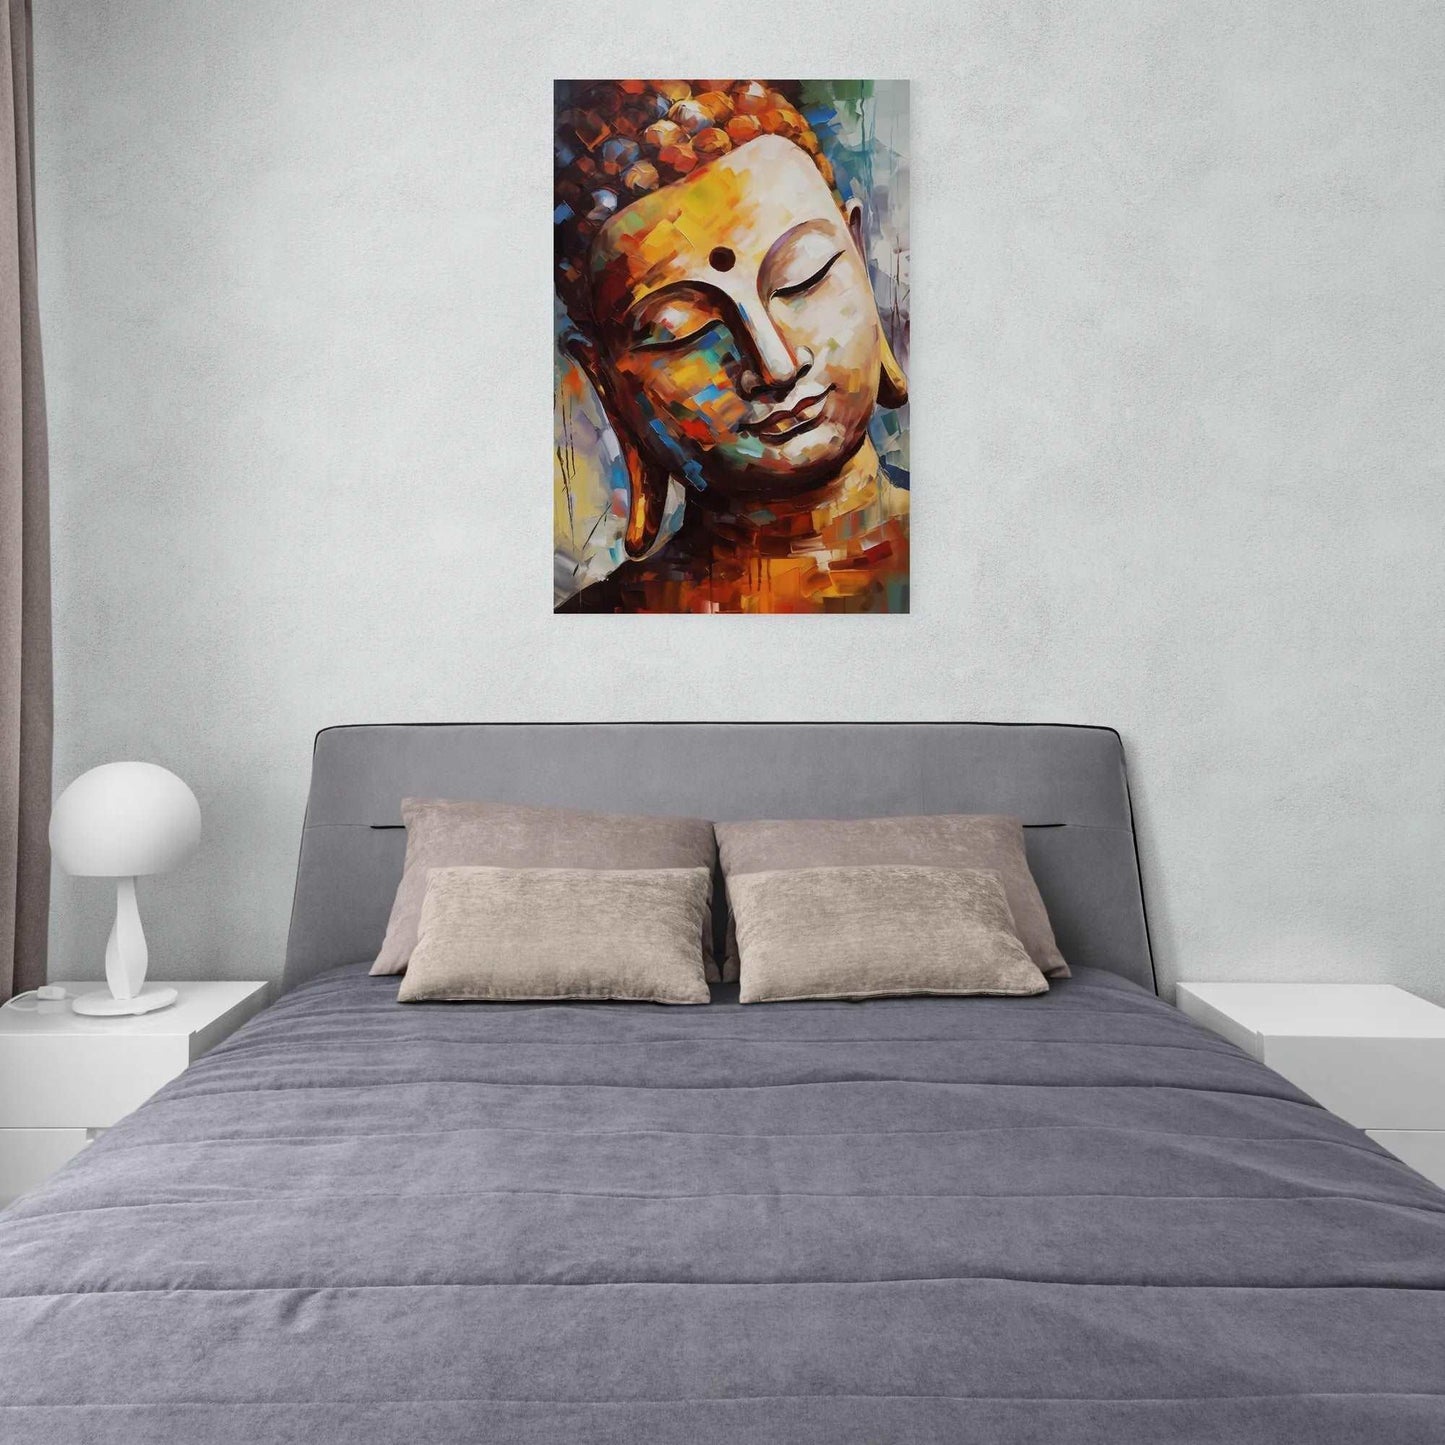 Modern bedroom featuring a bright Buddha painting with abstract elements, adding a touch of serenity next to a bed with green and white pillows.